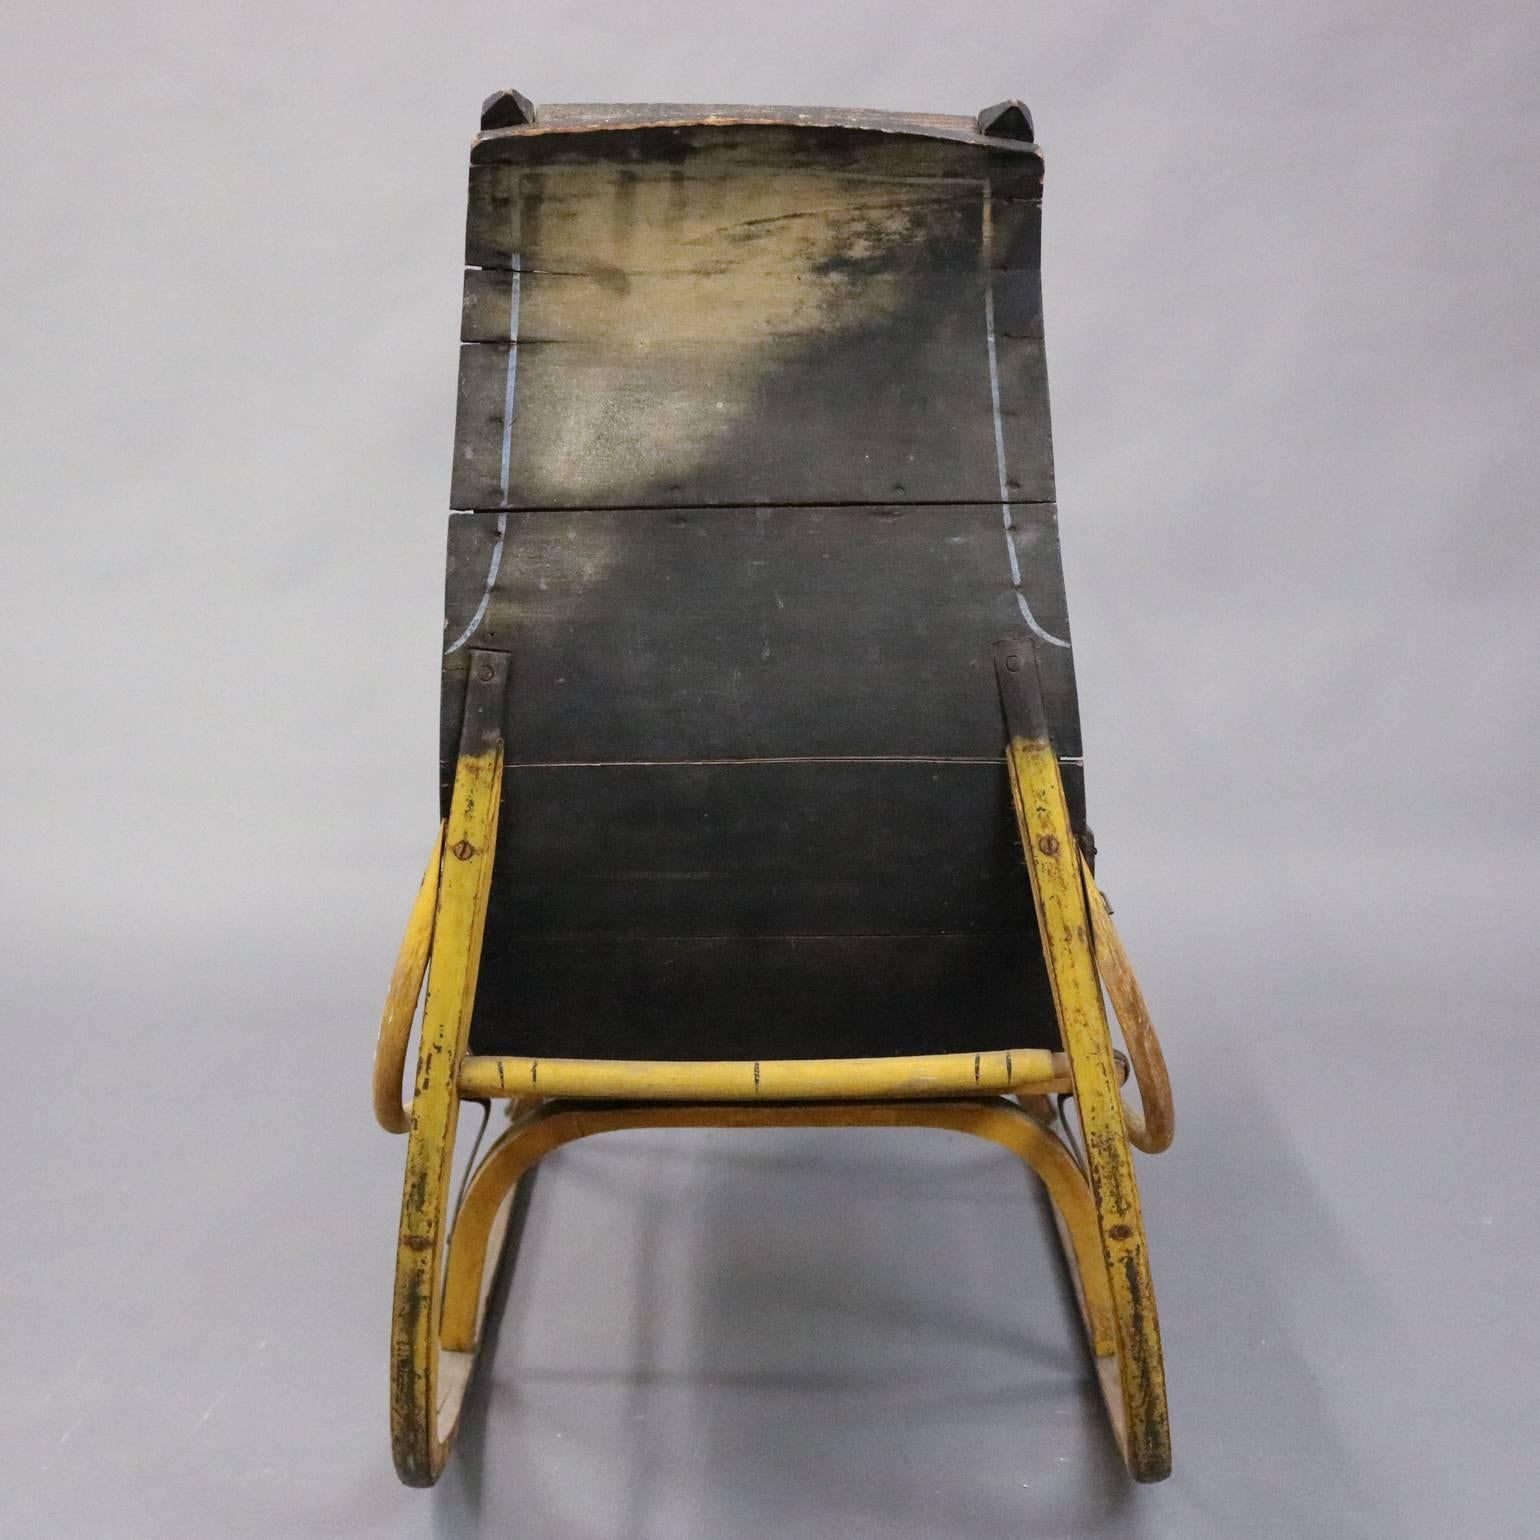 American Antique Child's Push Sled with Original Finish and Hand-Painted Details